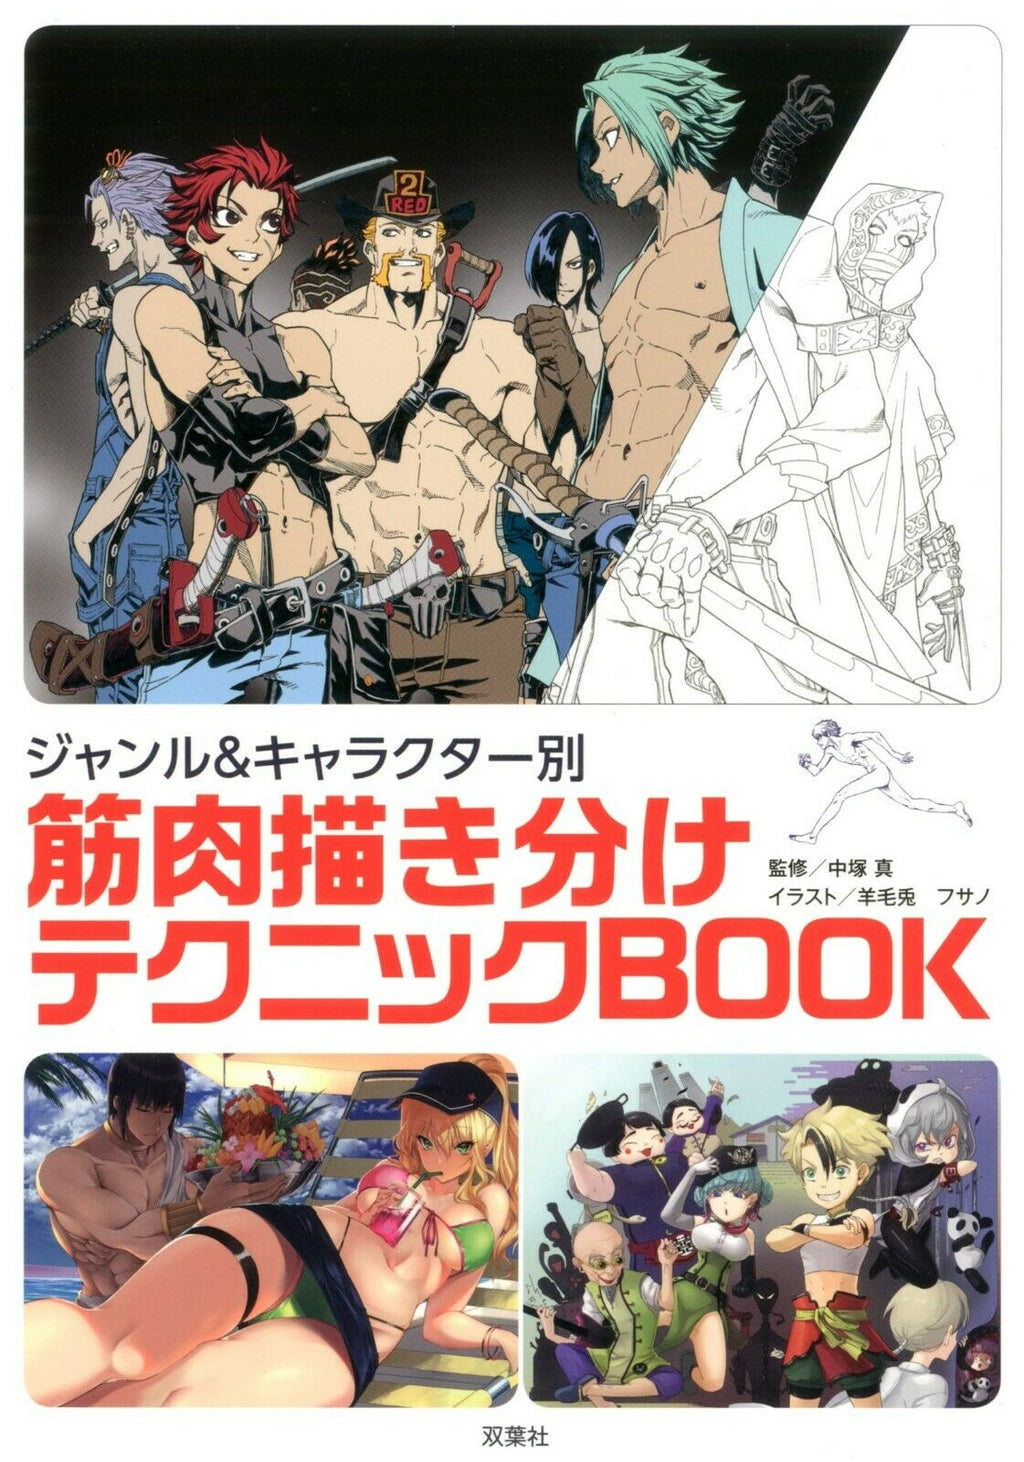 NEW How To Draw Manga Each Genre & Character Muscle Technique BOOK | JAPAN